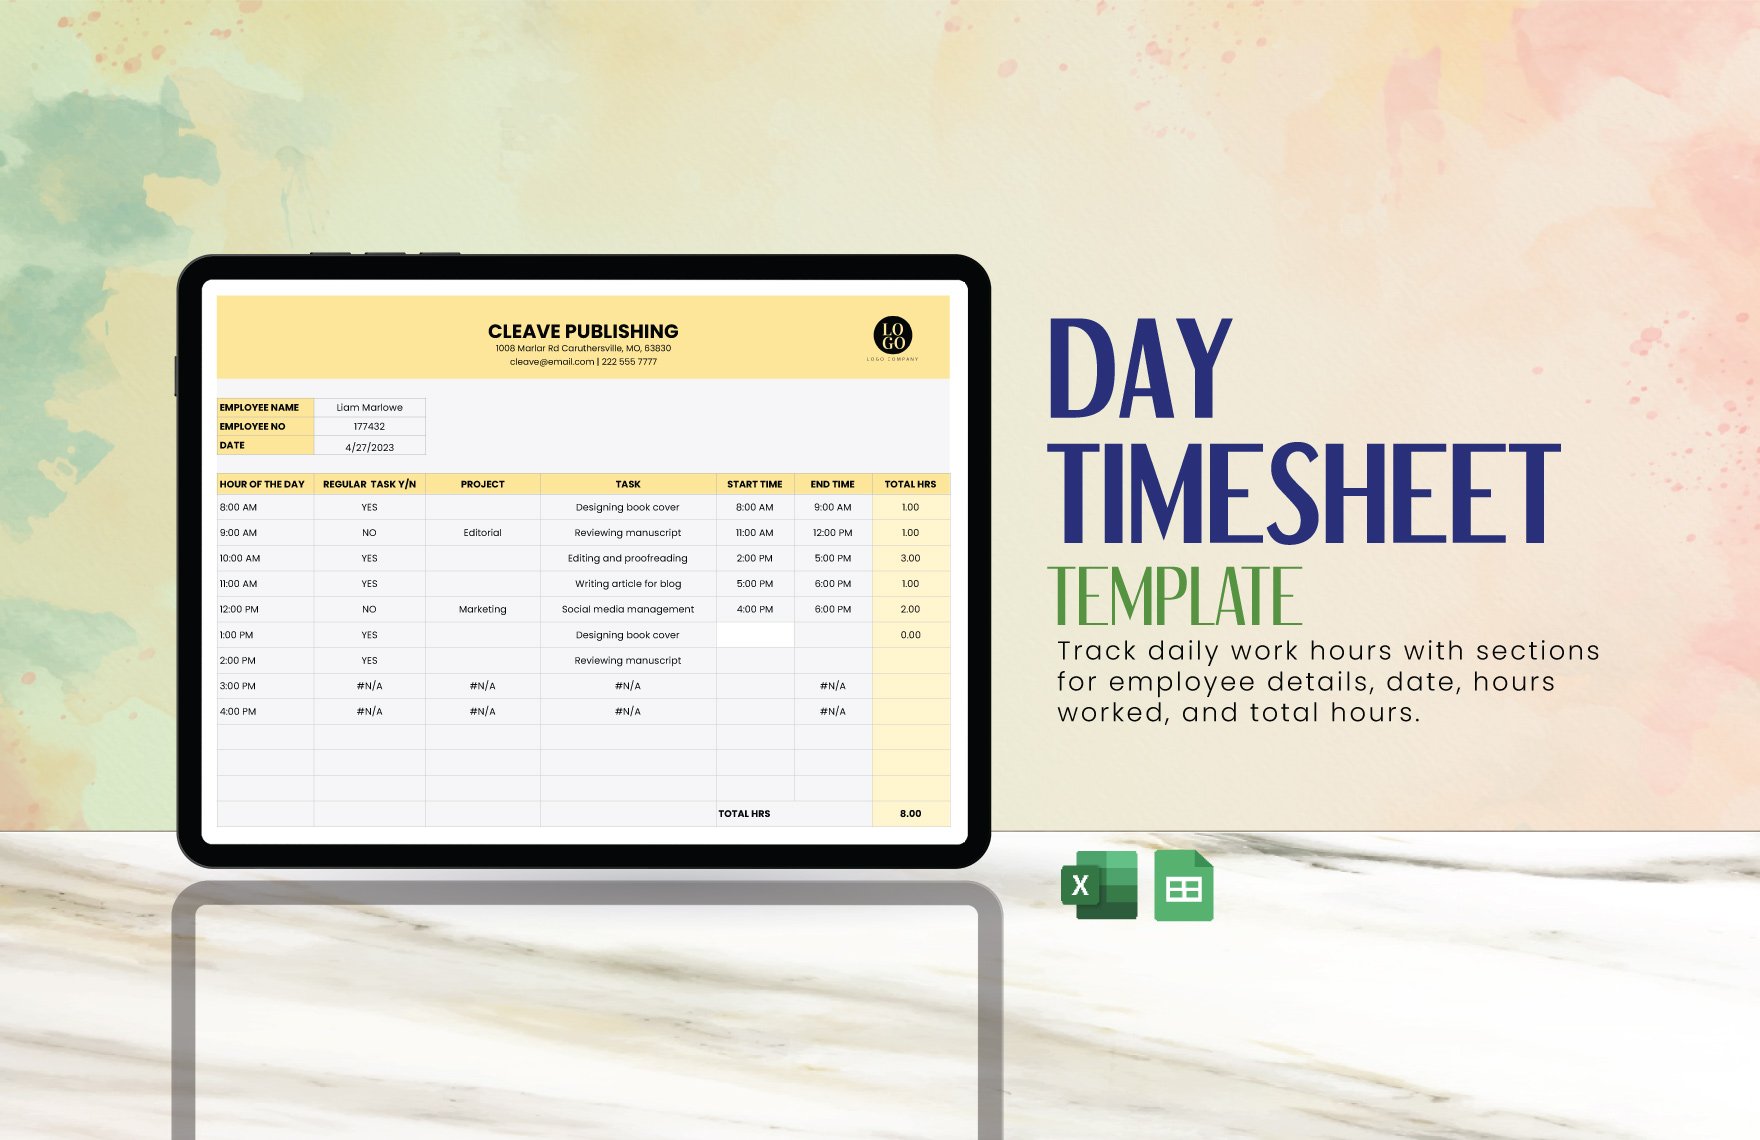 Day Timesheet Template in Excel, Google Sheets